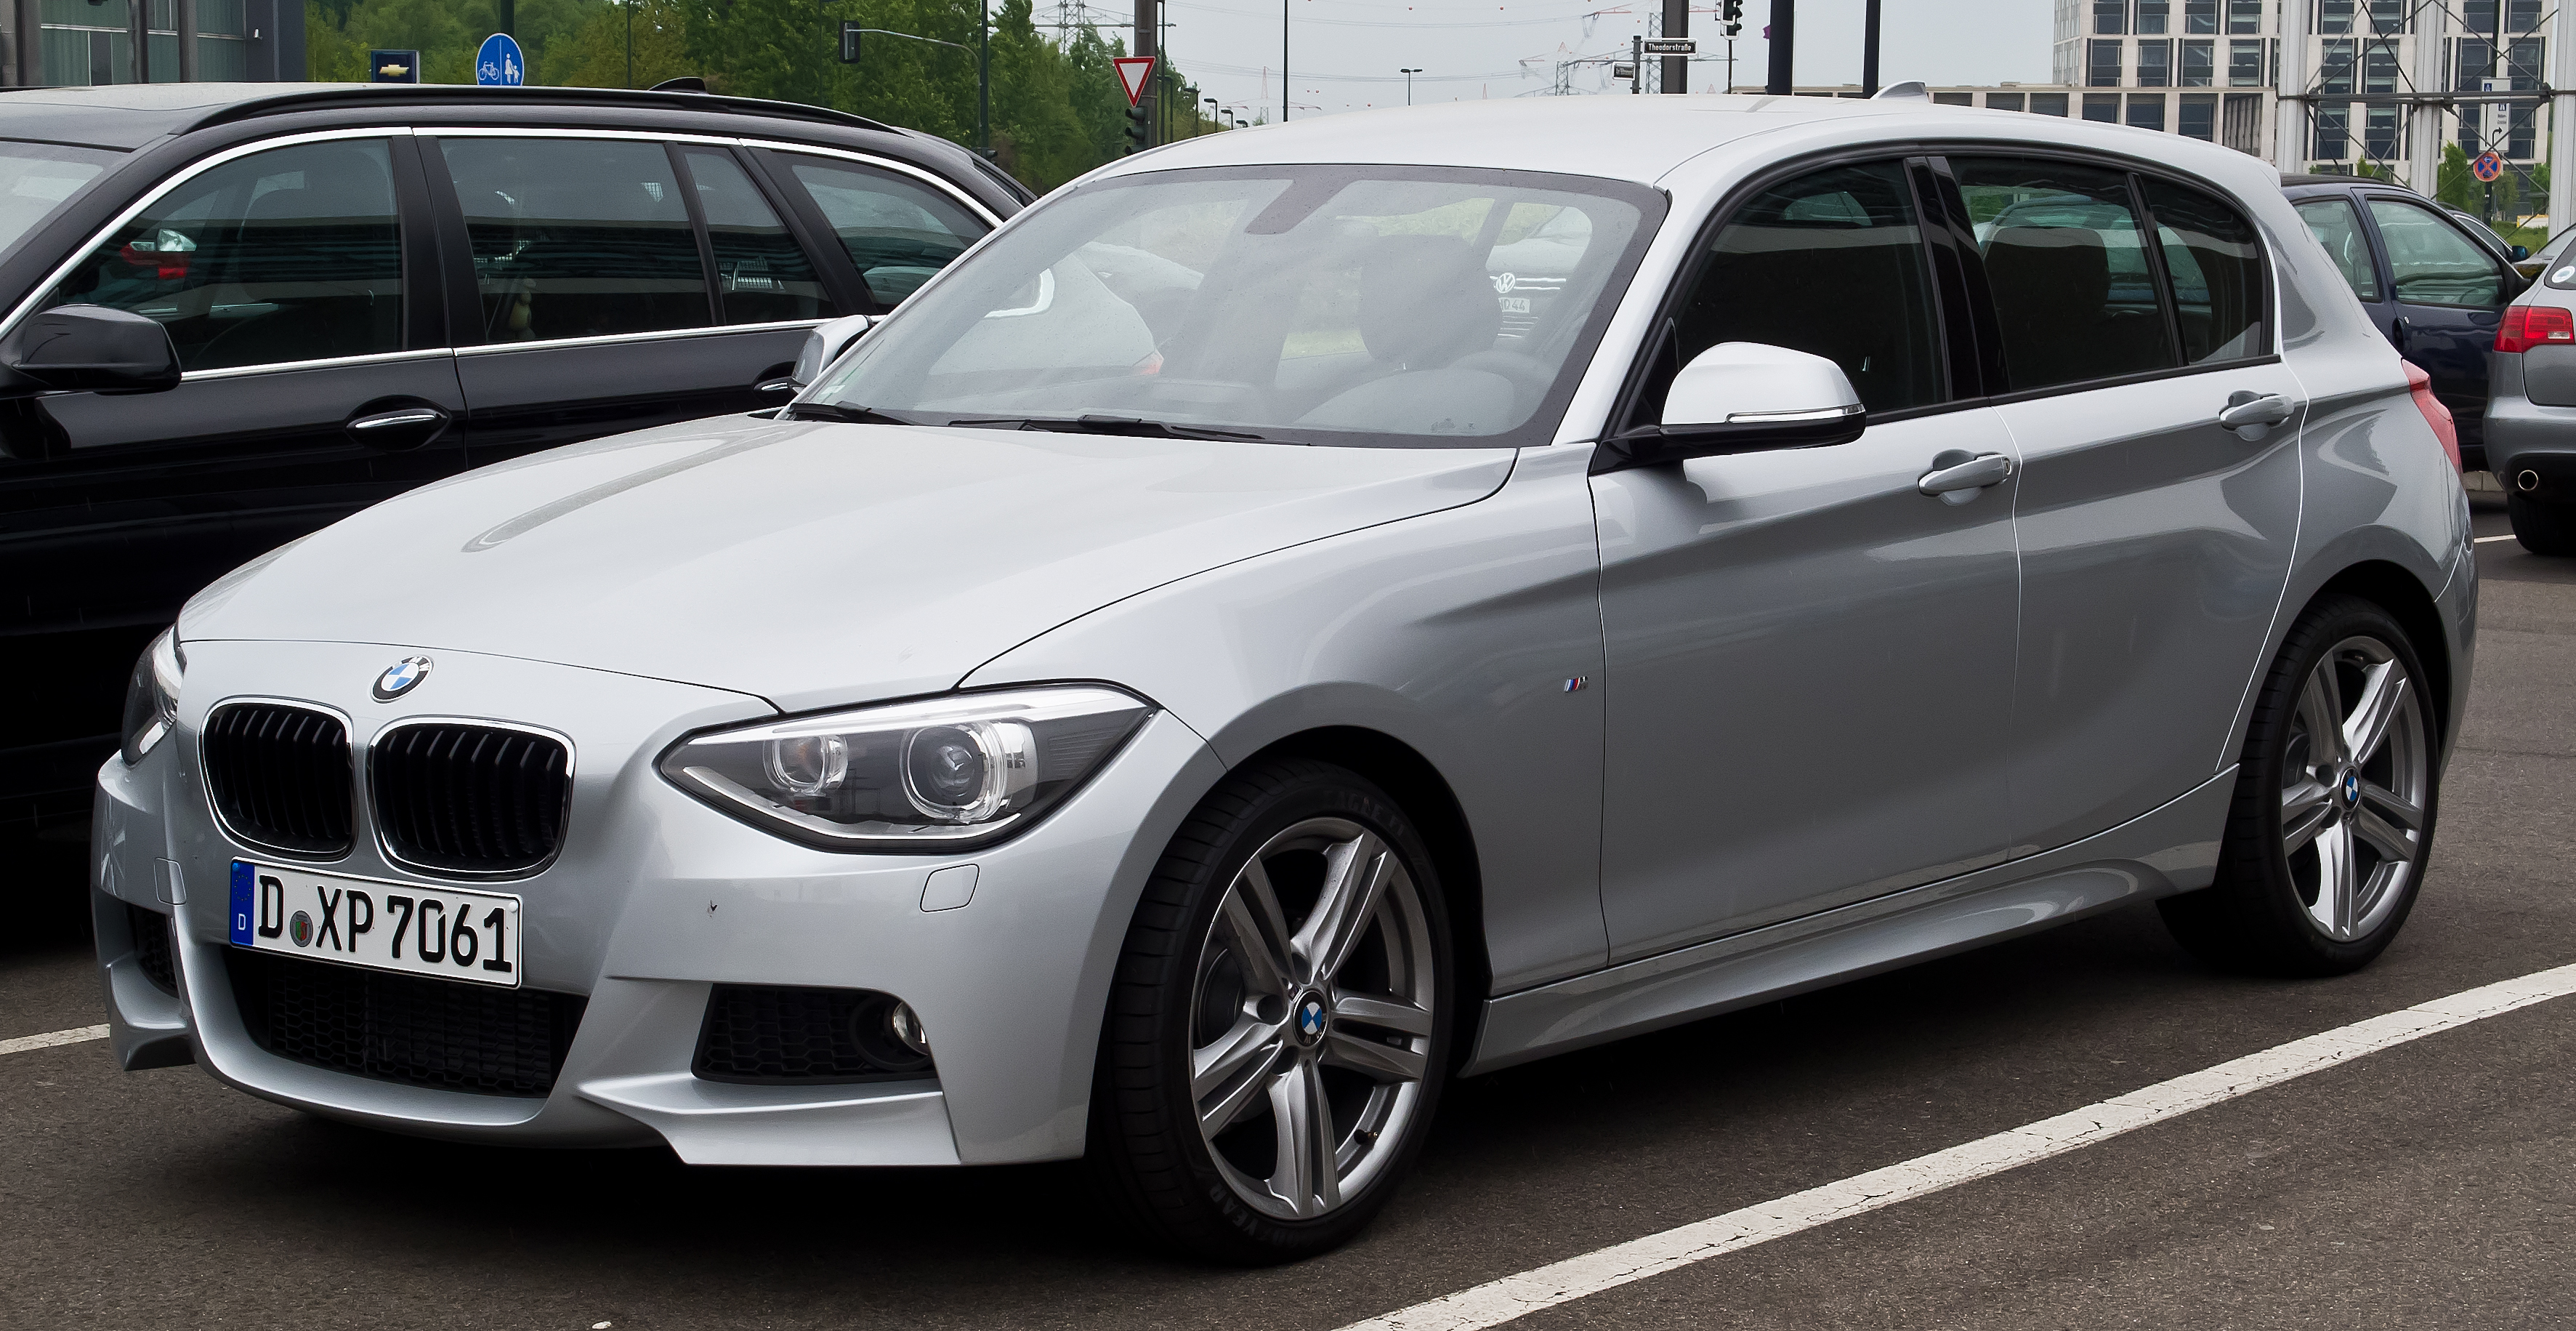 BMW 1-series F20 (2011): 3dr and 5dr scooped